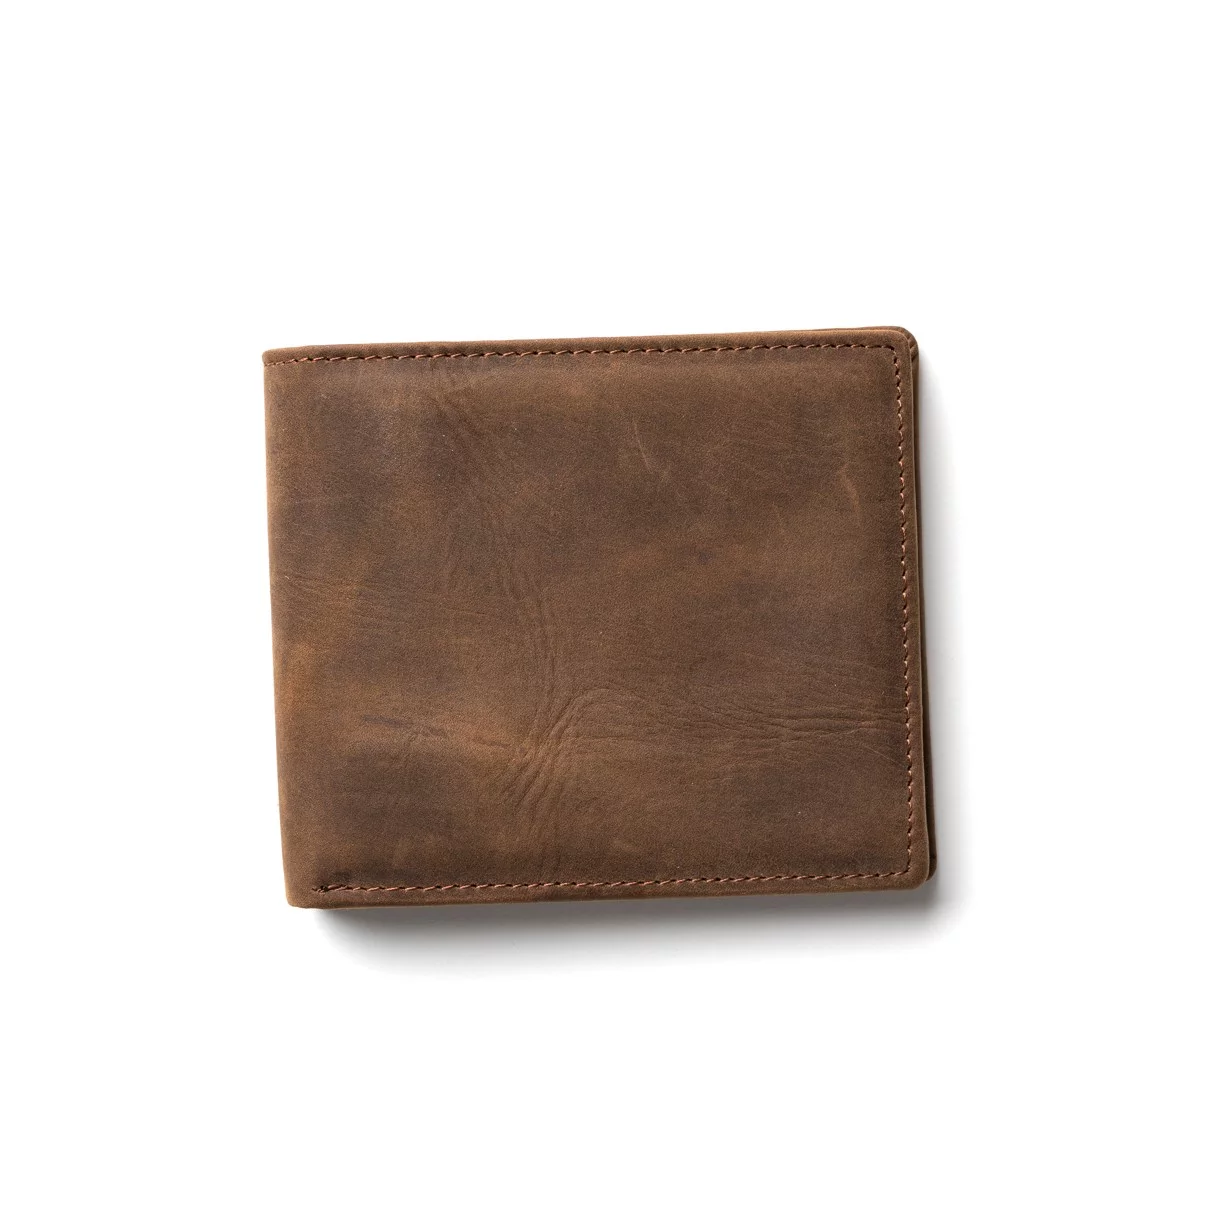 Portefeuille Fullhardy Brown D1119 (Brown)